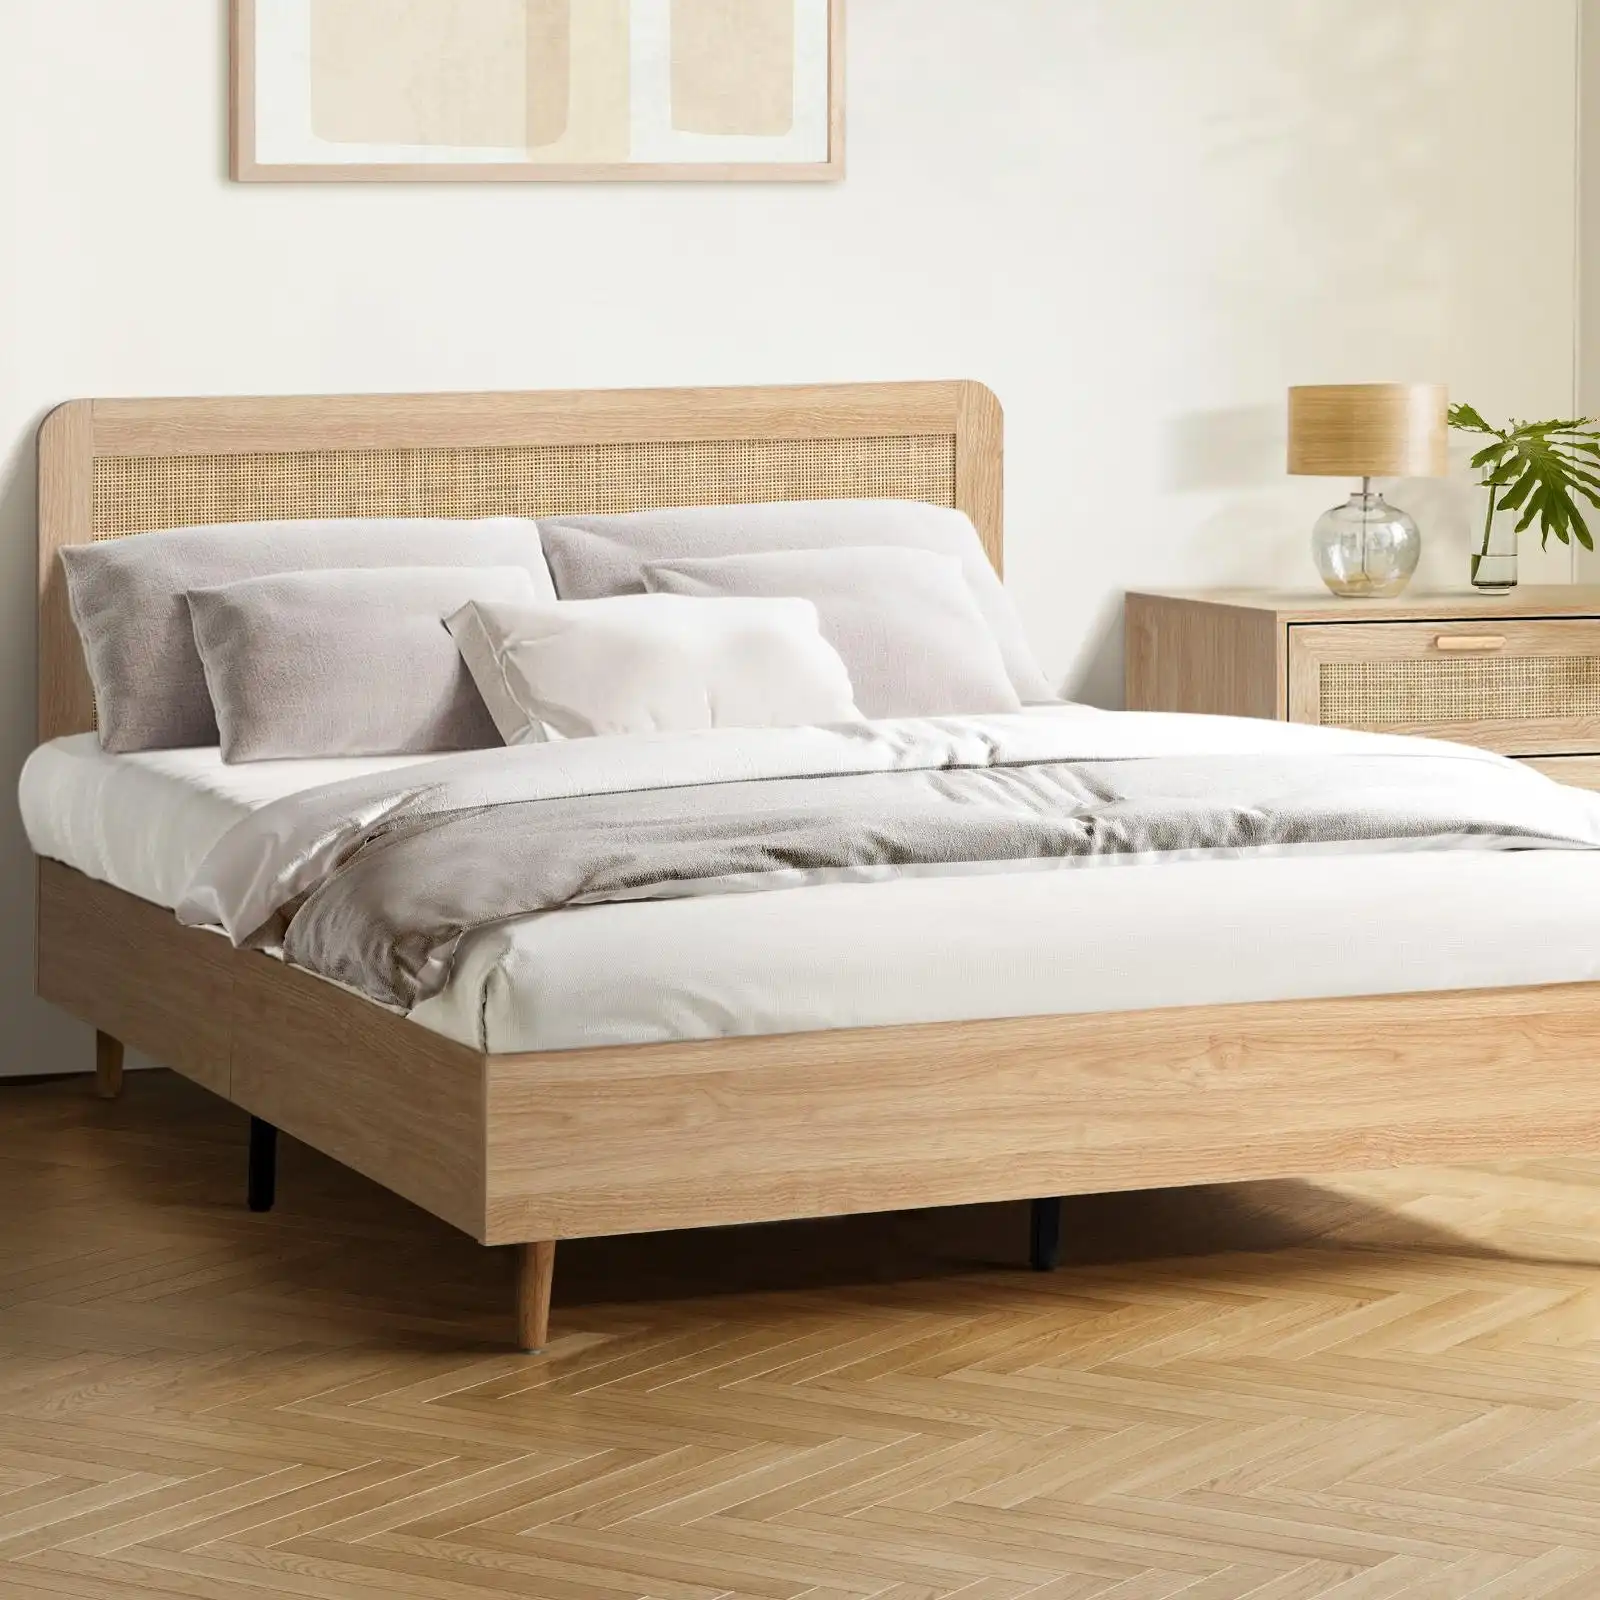 Oikiture Bed Frame Double Size Wooden Bed Platform Genuine Rattan